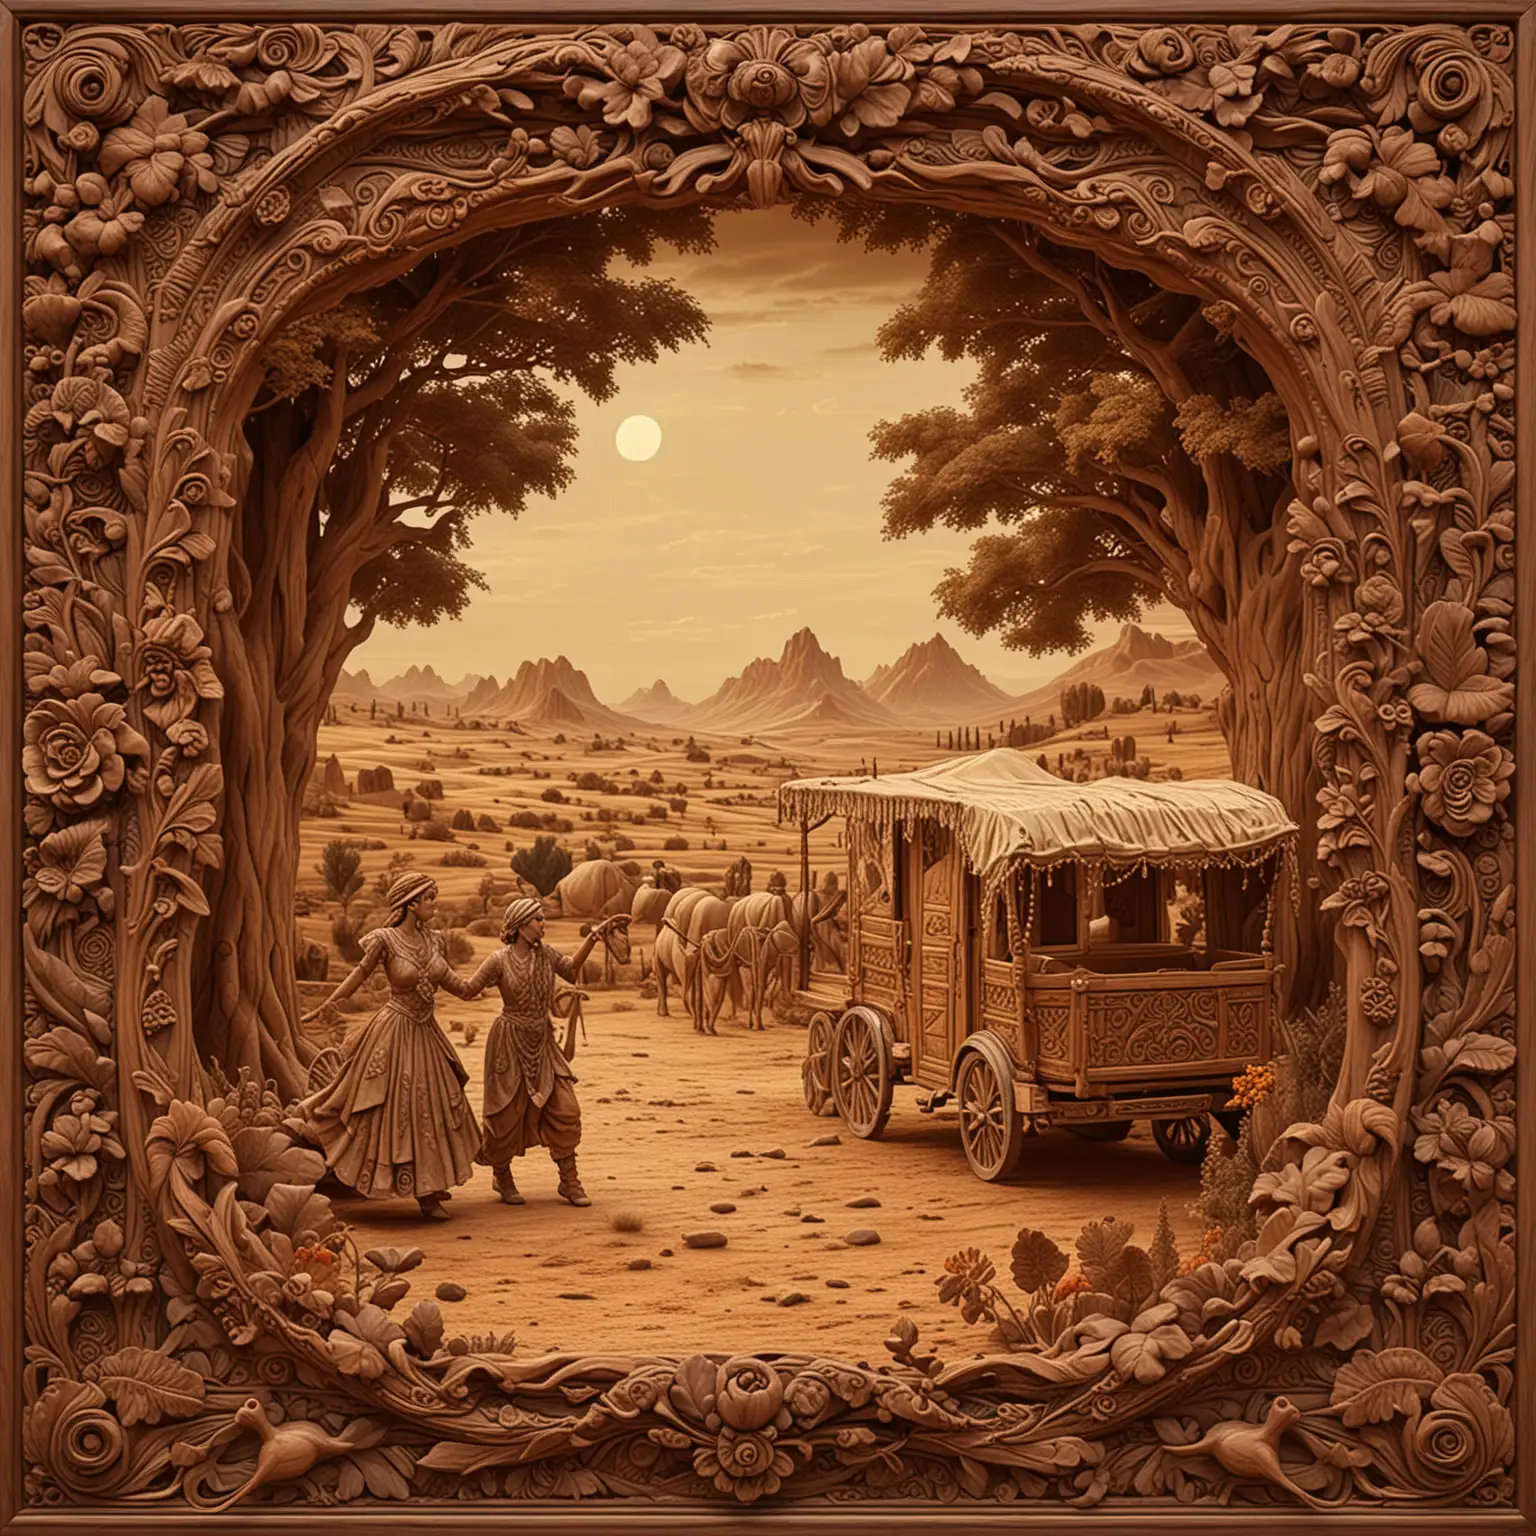 3D SEAMLESS AND TILEABLE LACQUERED WOOD WITH A FINELY CARVED FRAME SURROUND FEATURING  CARVED WOOD GYPSY DANCING AGAINST A GYPSY CARAVAN SCENE.




